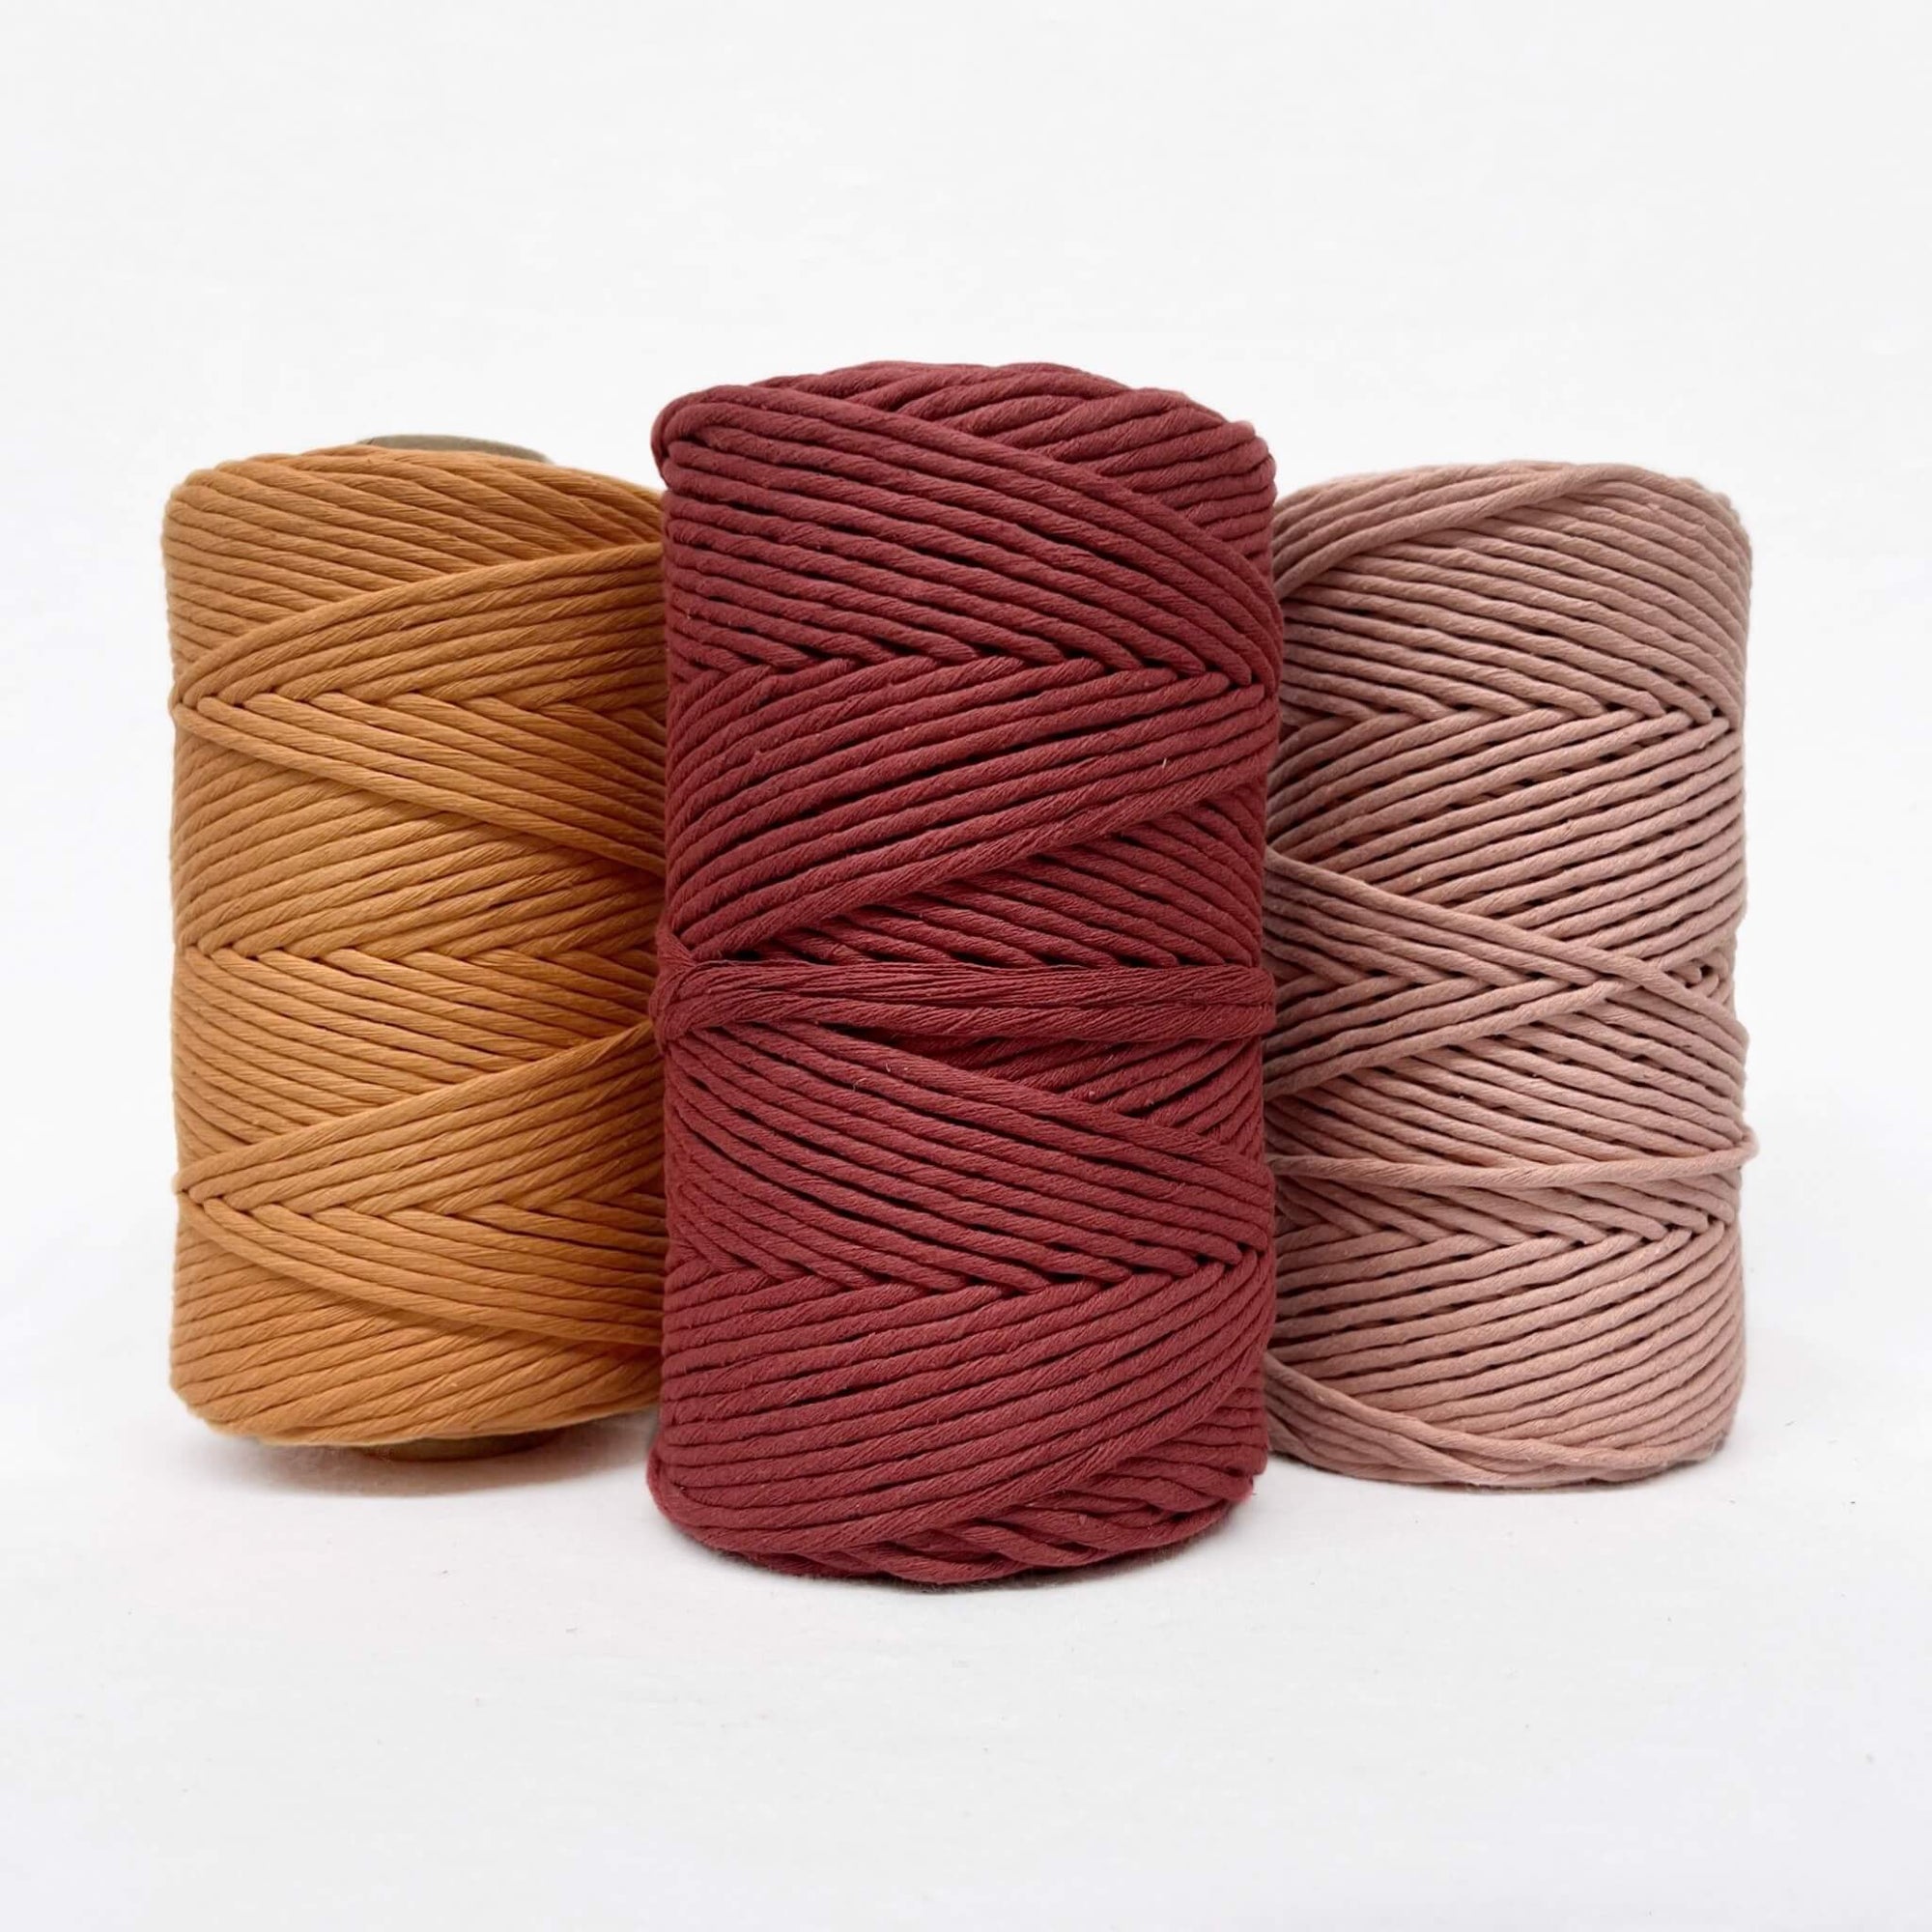 caramel red soft peach pink macrame cotton cord in group photo for workshops on white wall